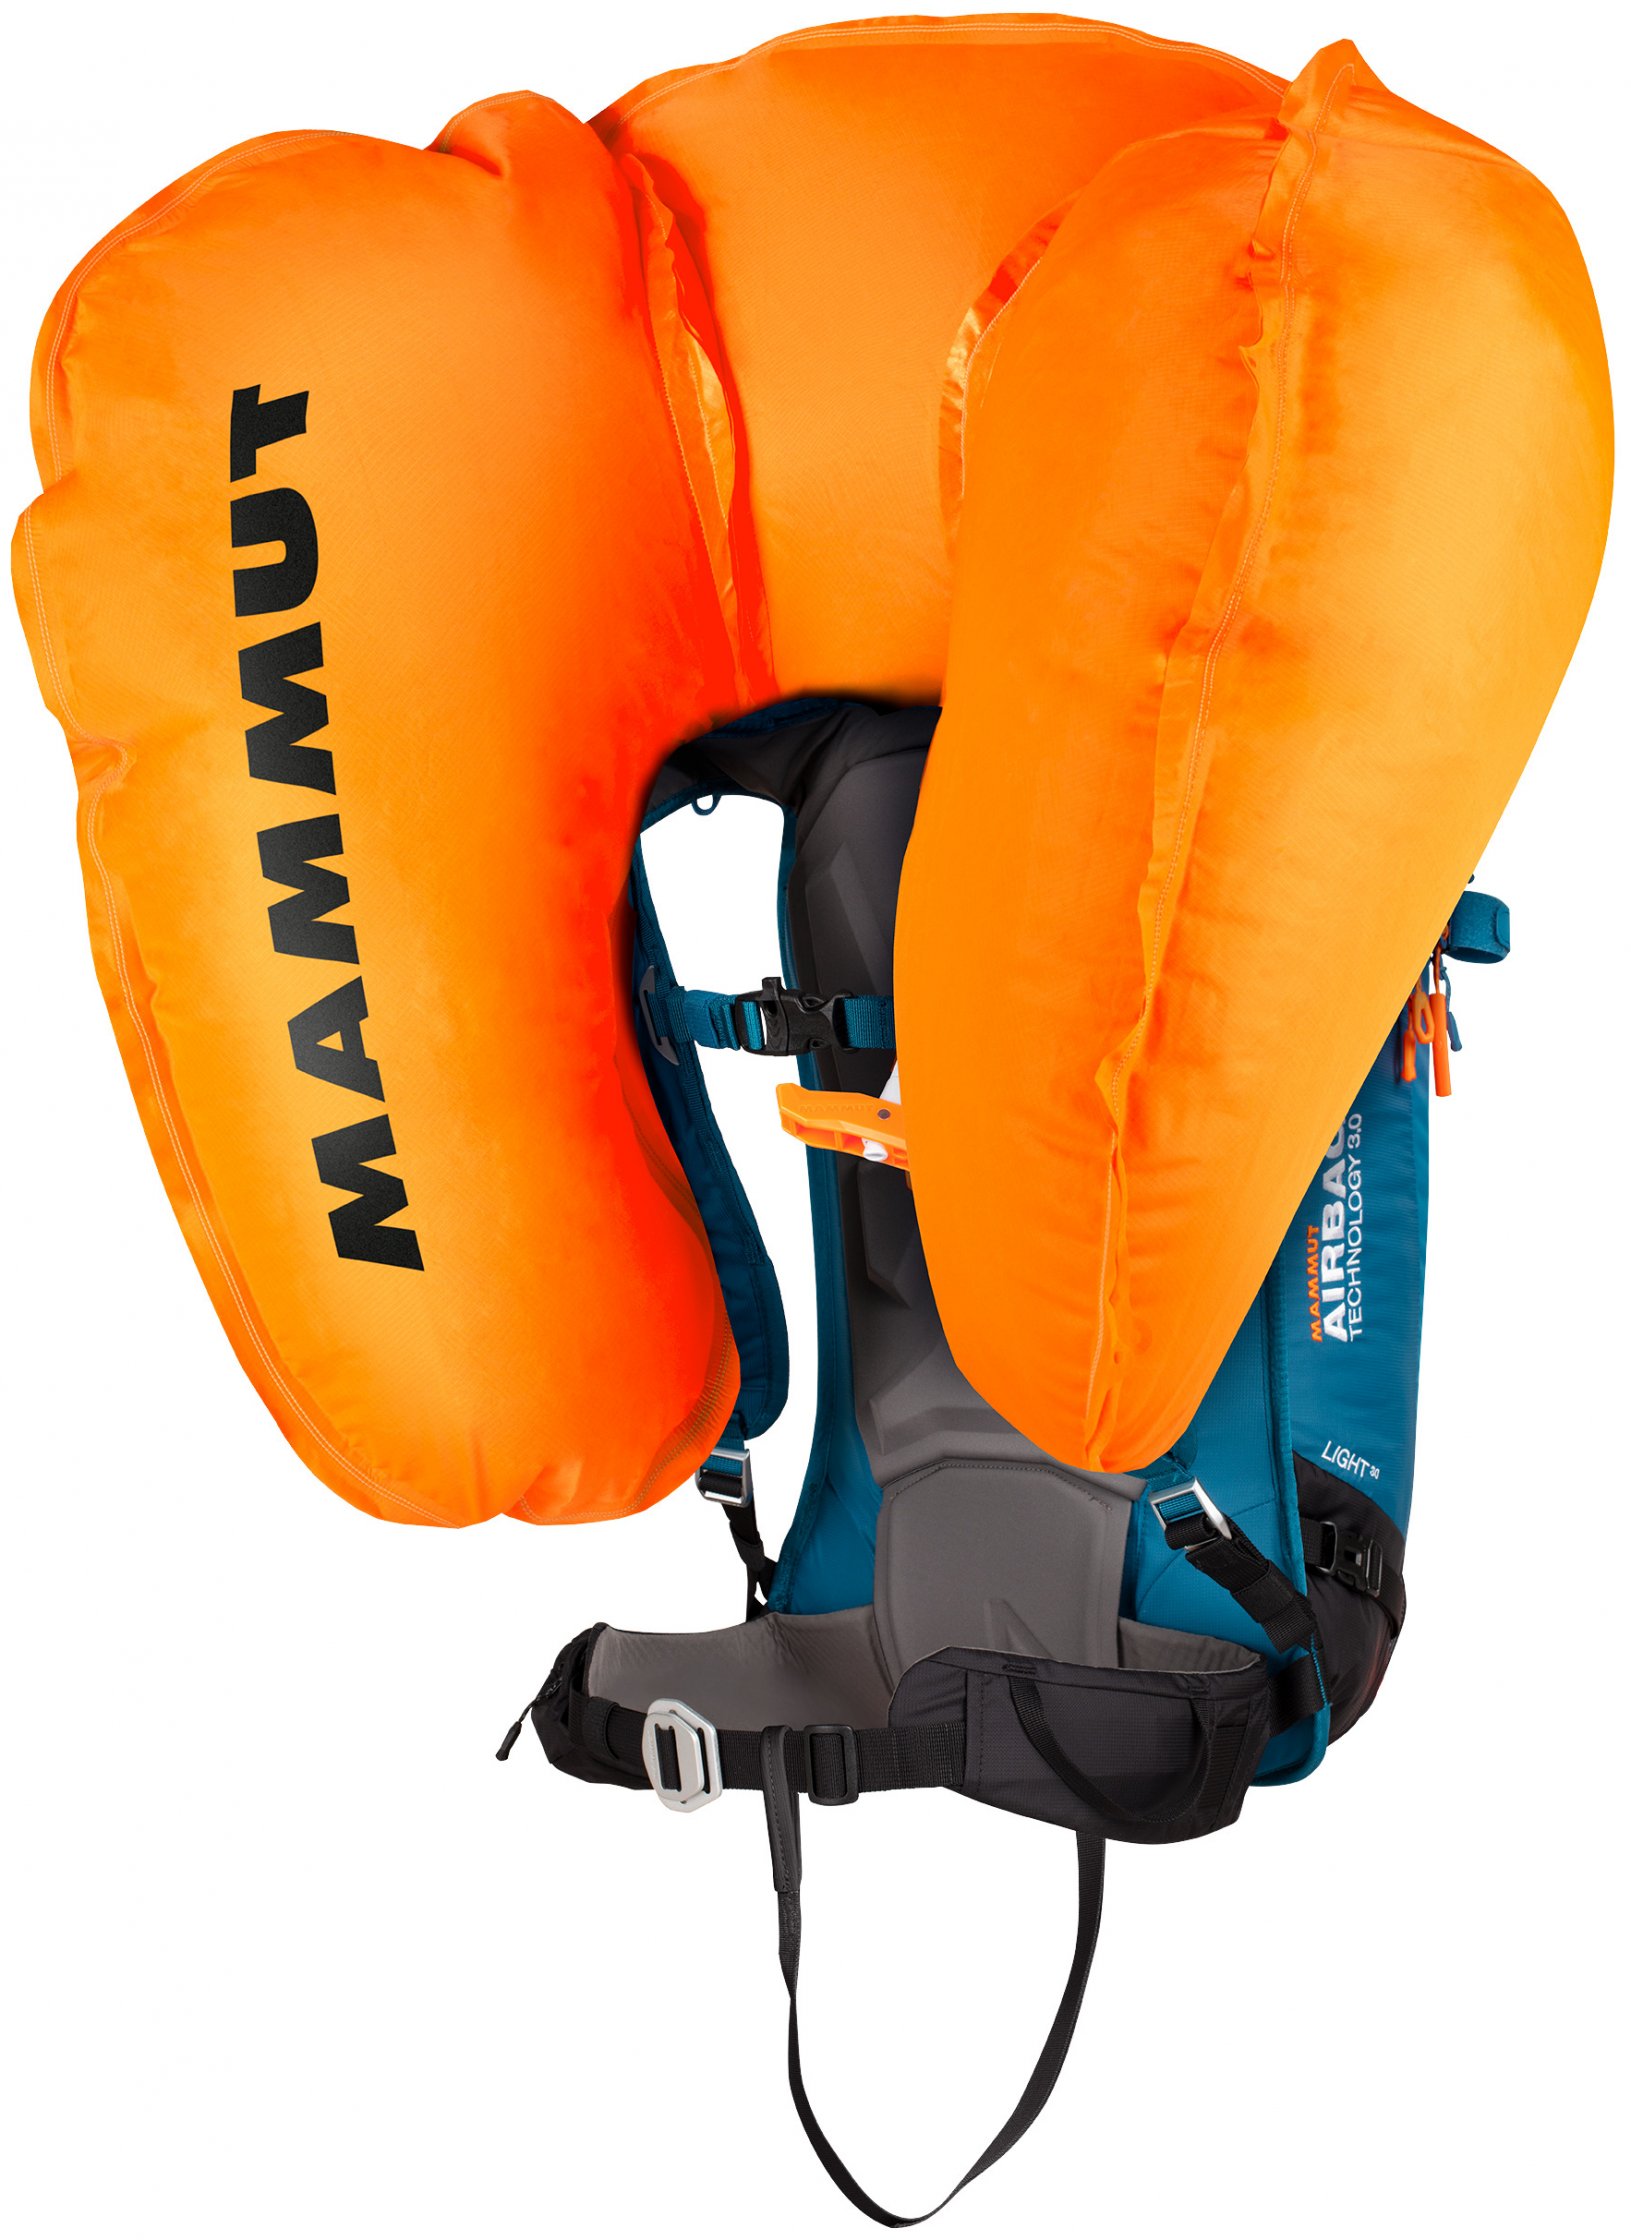 Clan Vrijwel Continentaal Mammut Light Protection Airbag Pack